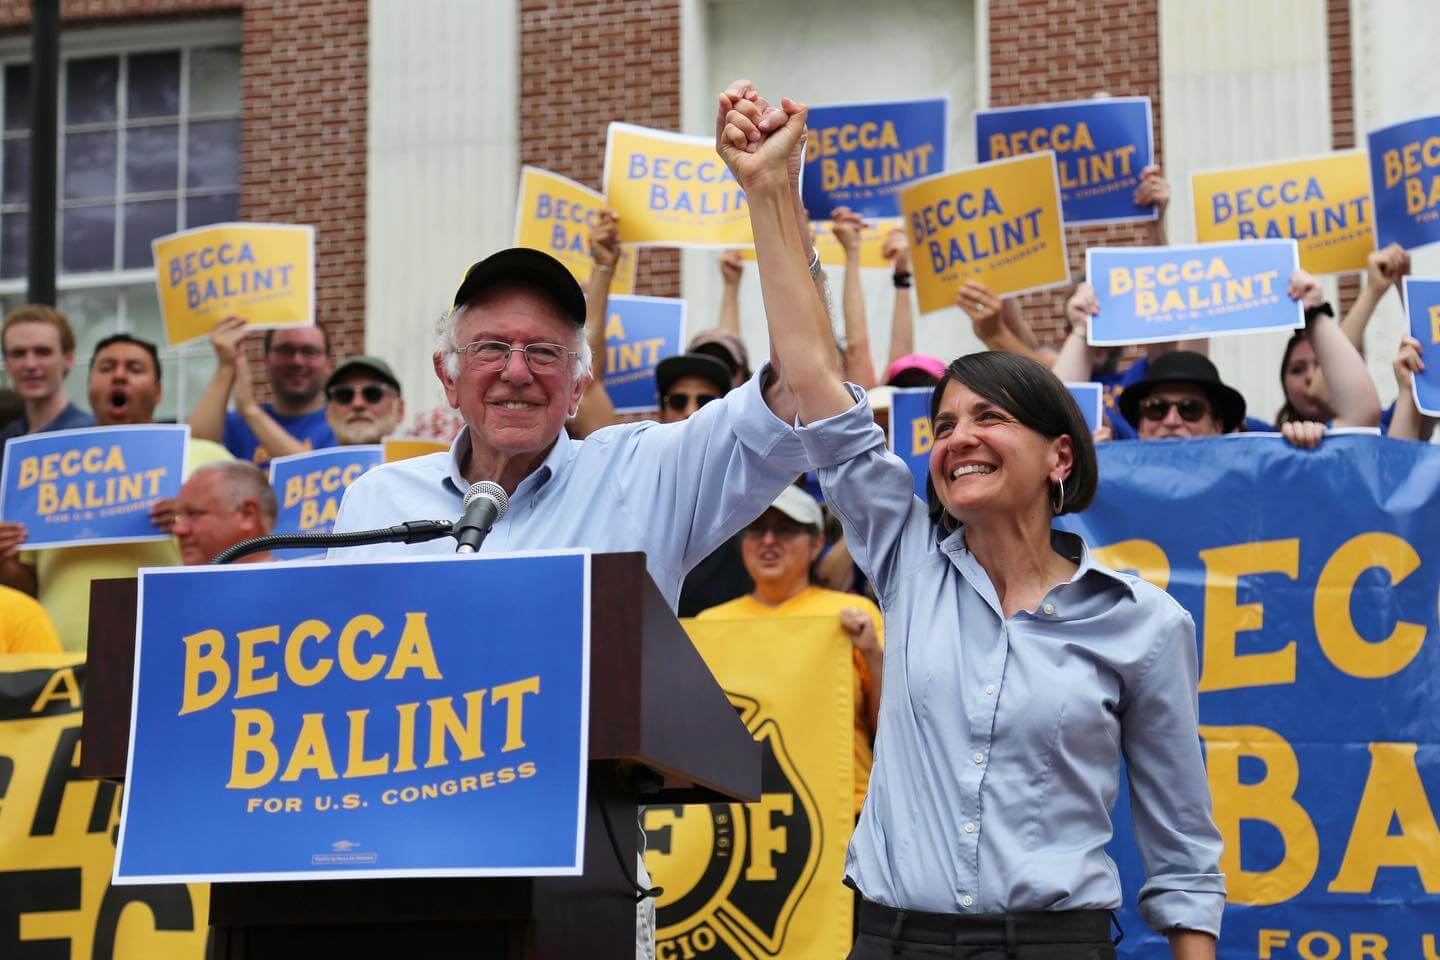 Becca Balint (right), president pro tempore of the Vermont Senate and candidate for U.S. House seat, with Sen. Bernie Sanders at a campaign rally on Aug. 1, 2022.